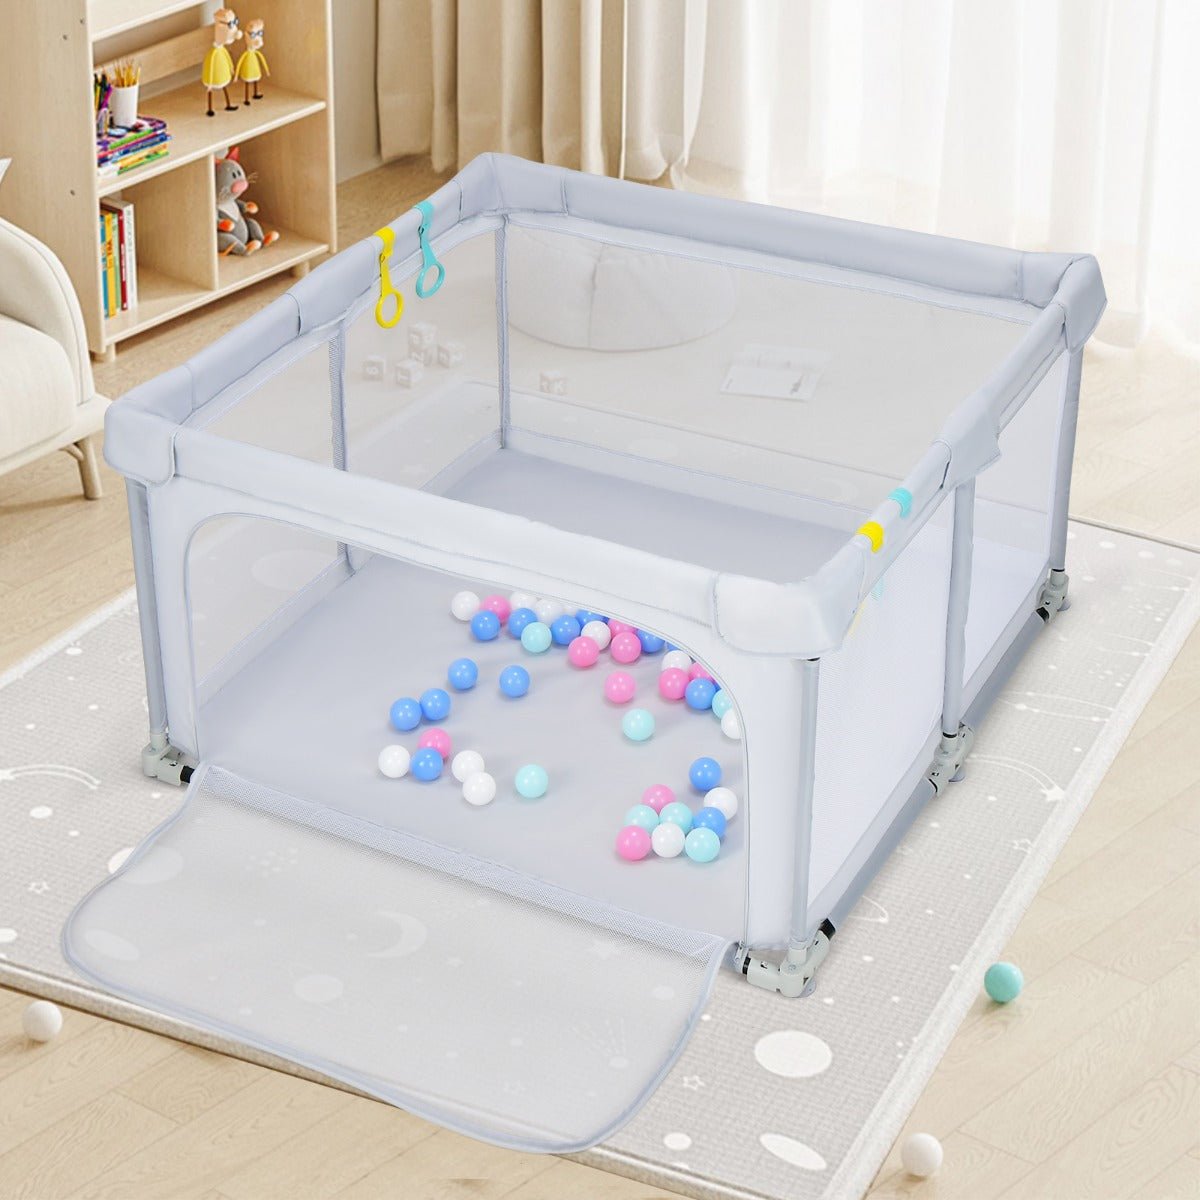 Baby Playpen: 124cm Interactive Center, Foldable Design with Balls and Pull Rings